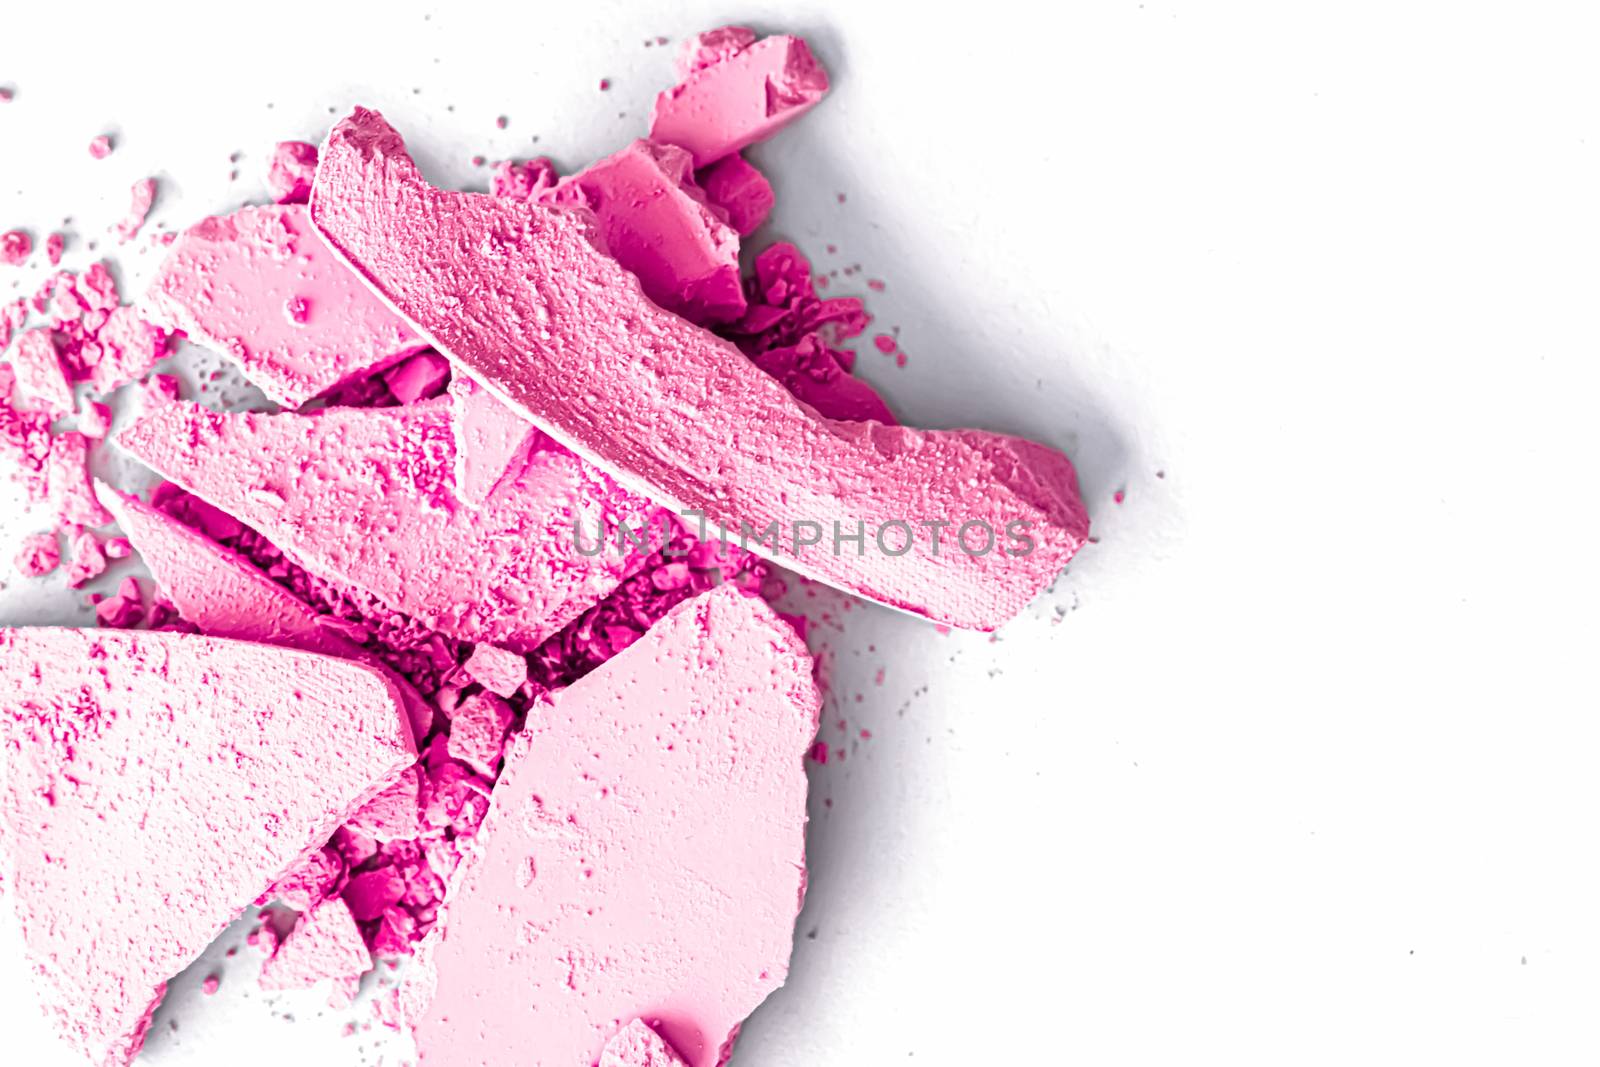 Pink eye shadow powder as makeup palette closeup isolated on whi by Anneleven